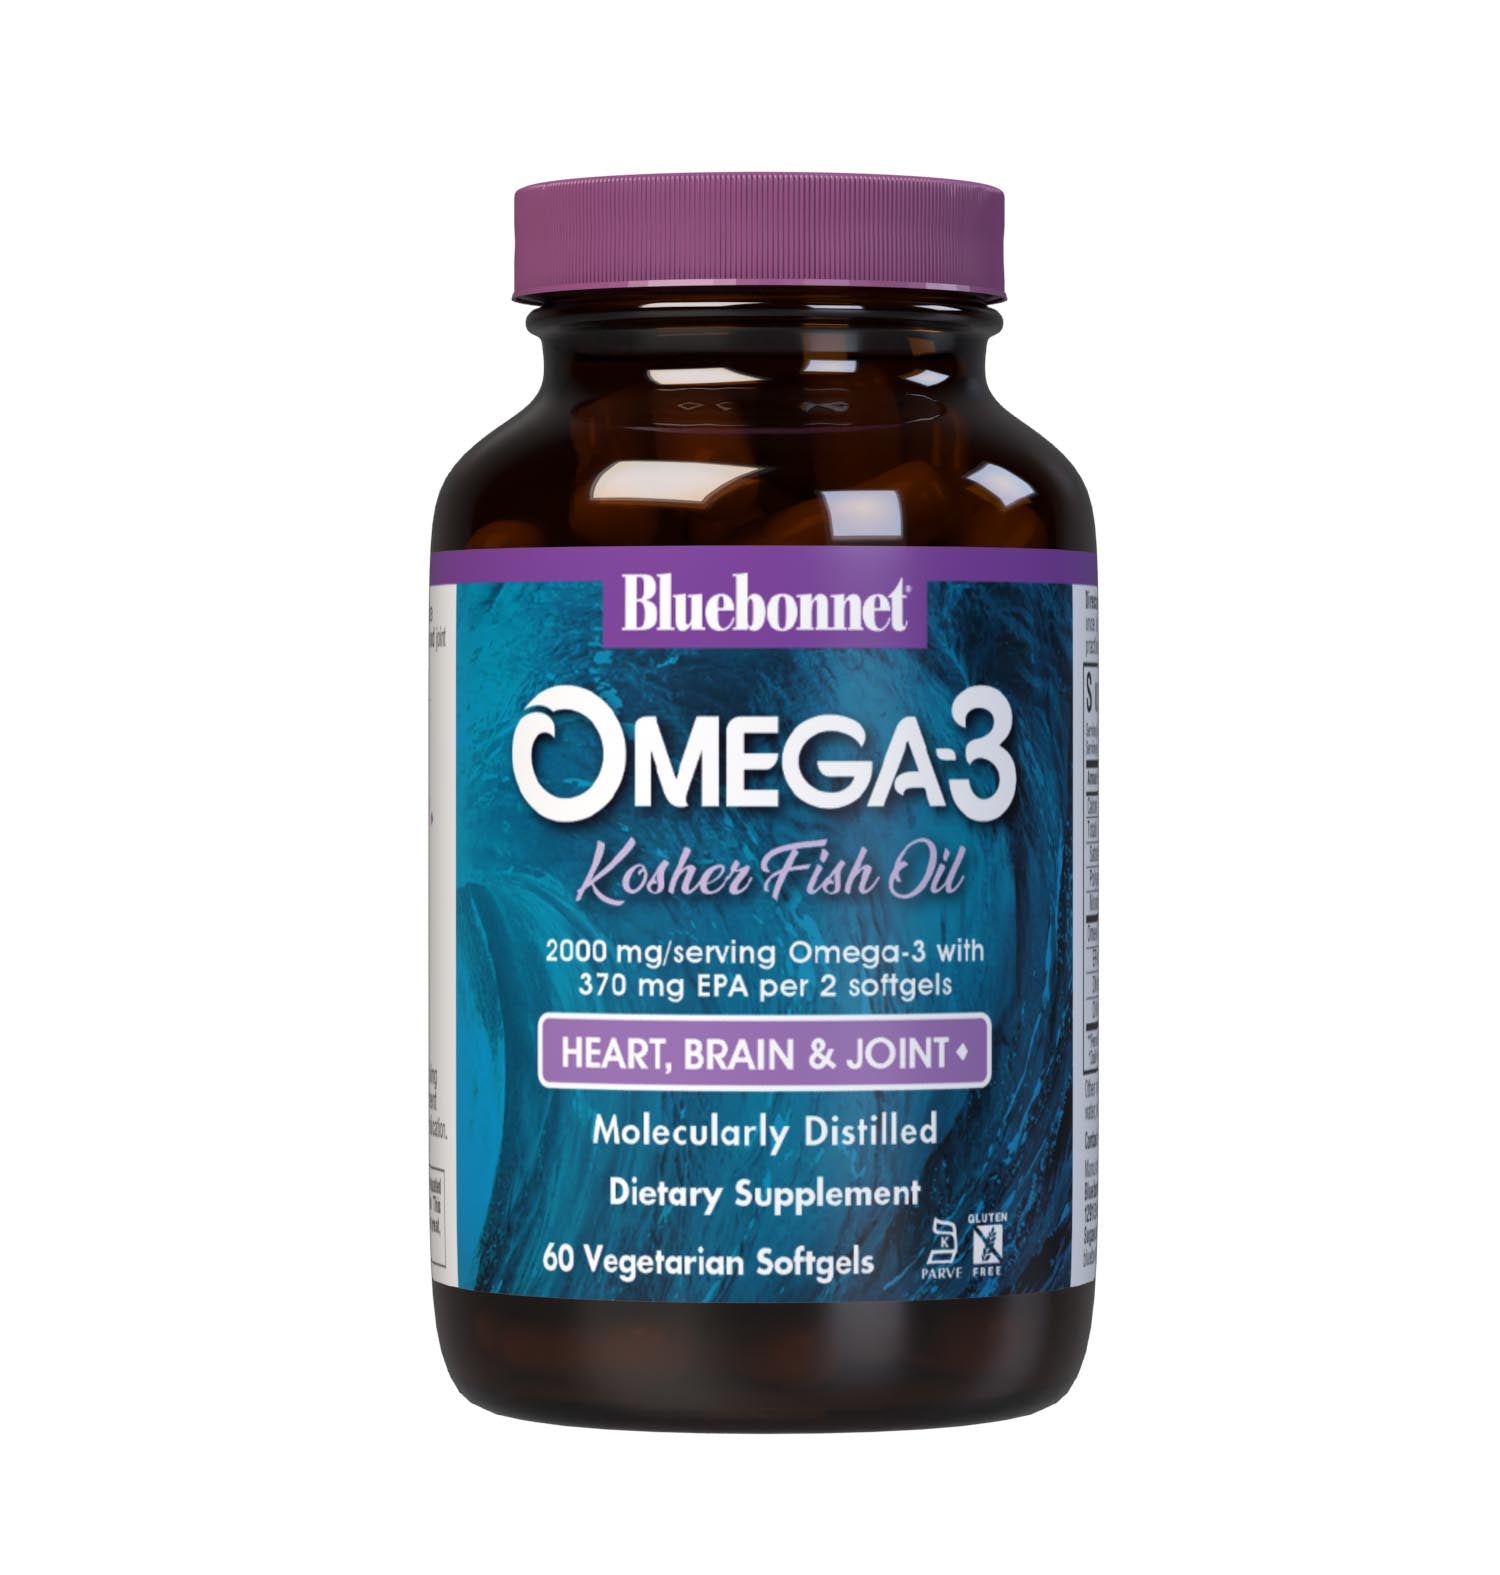 Omega-3 Kosher Fish Oil 60 Vegetarian Softgels are formulated with EPA, DHA and DPA to help support heart, brain and joint health by utilizing refined omega-3s from wild ocean fish. #size_60 count